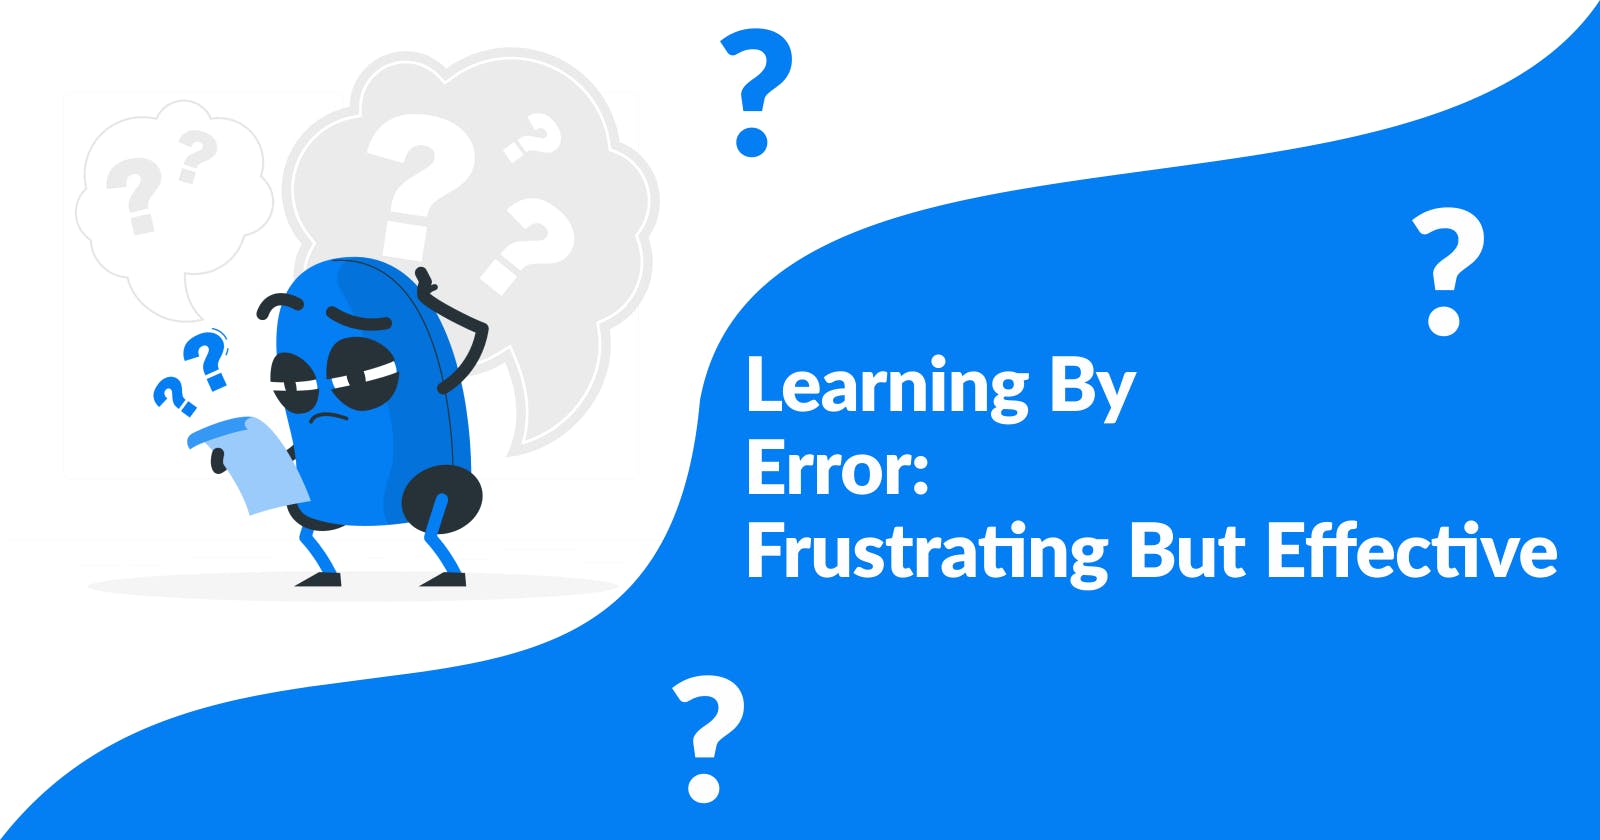 Learning By Error: Frustrating But Effective